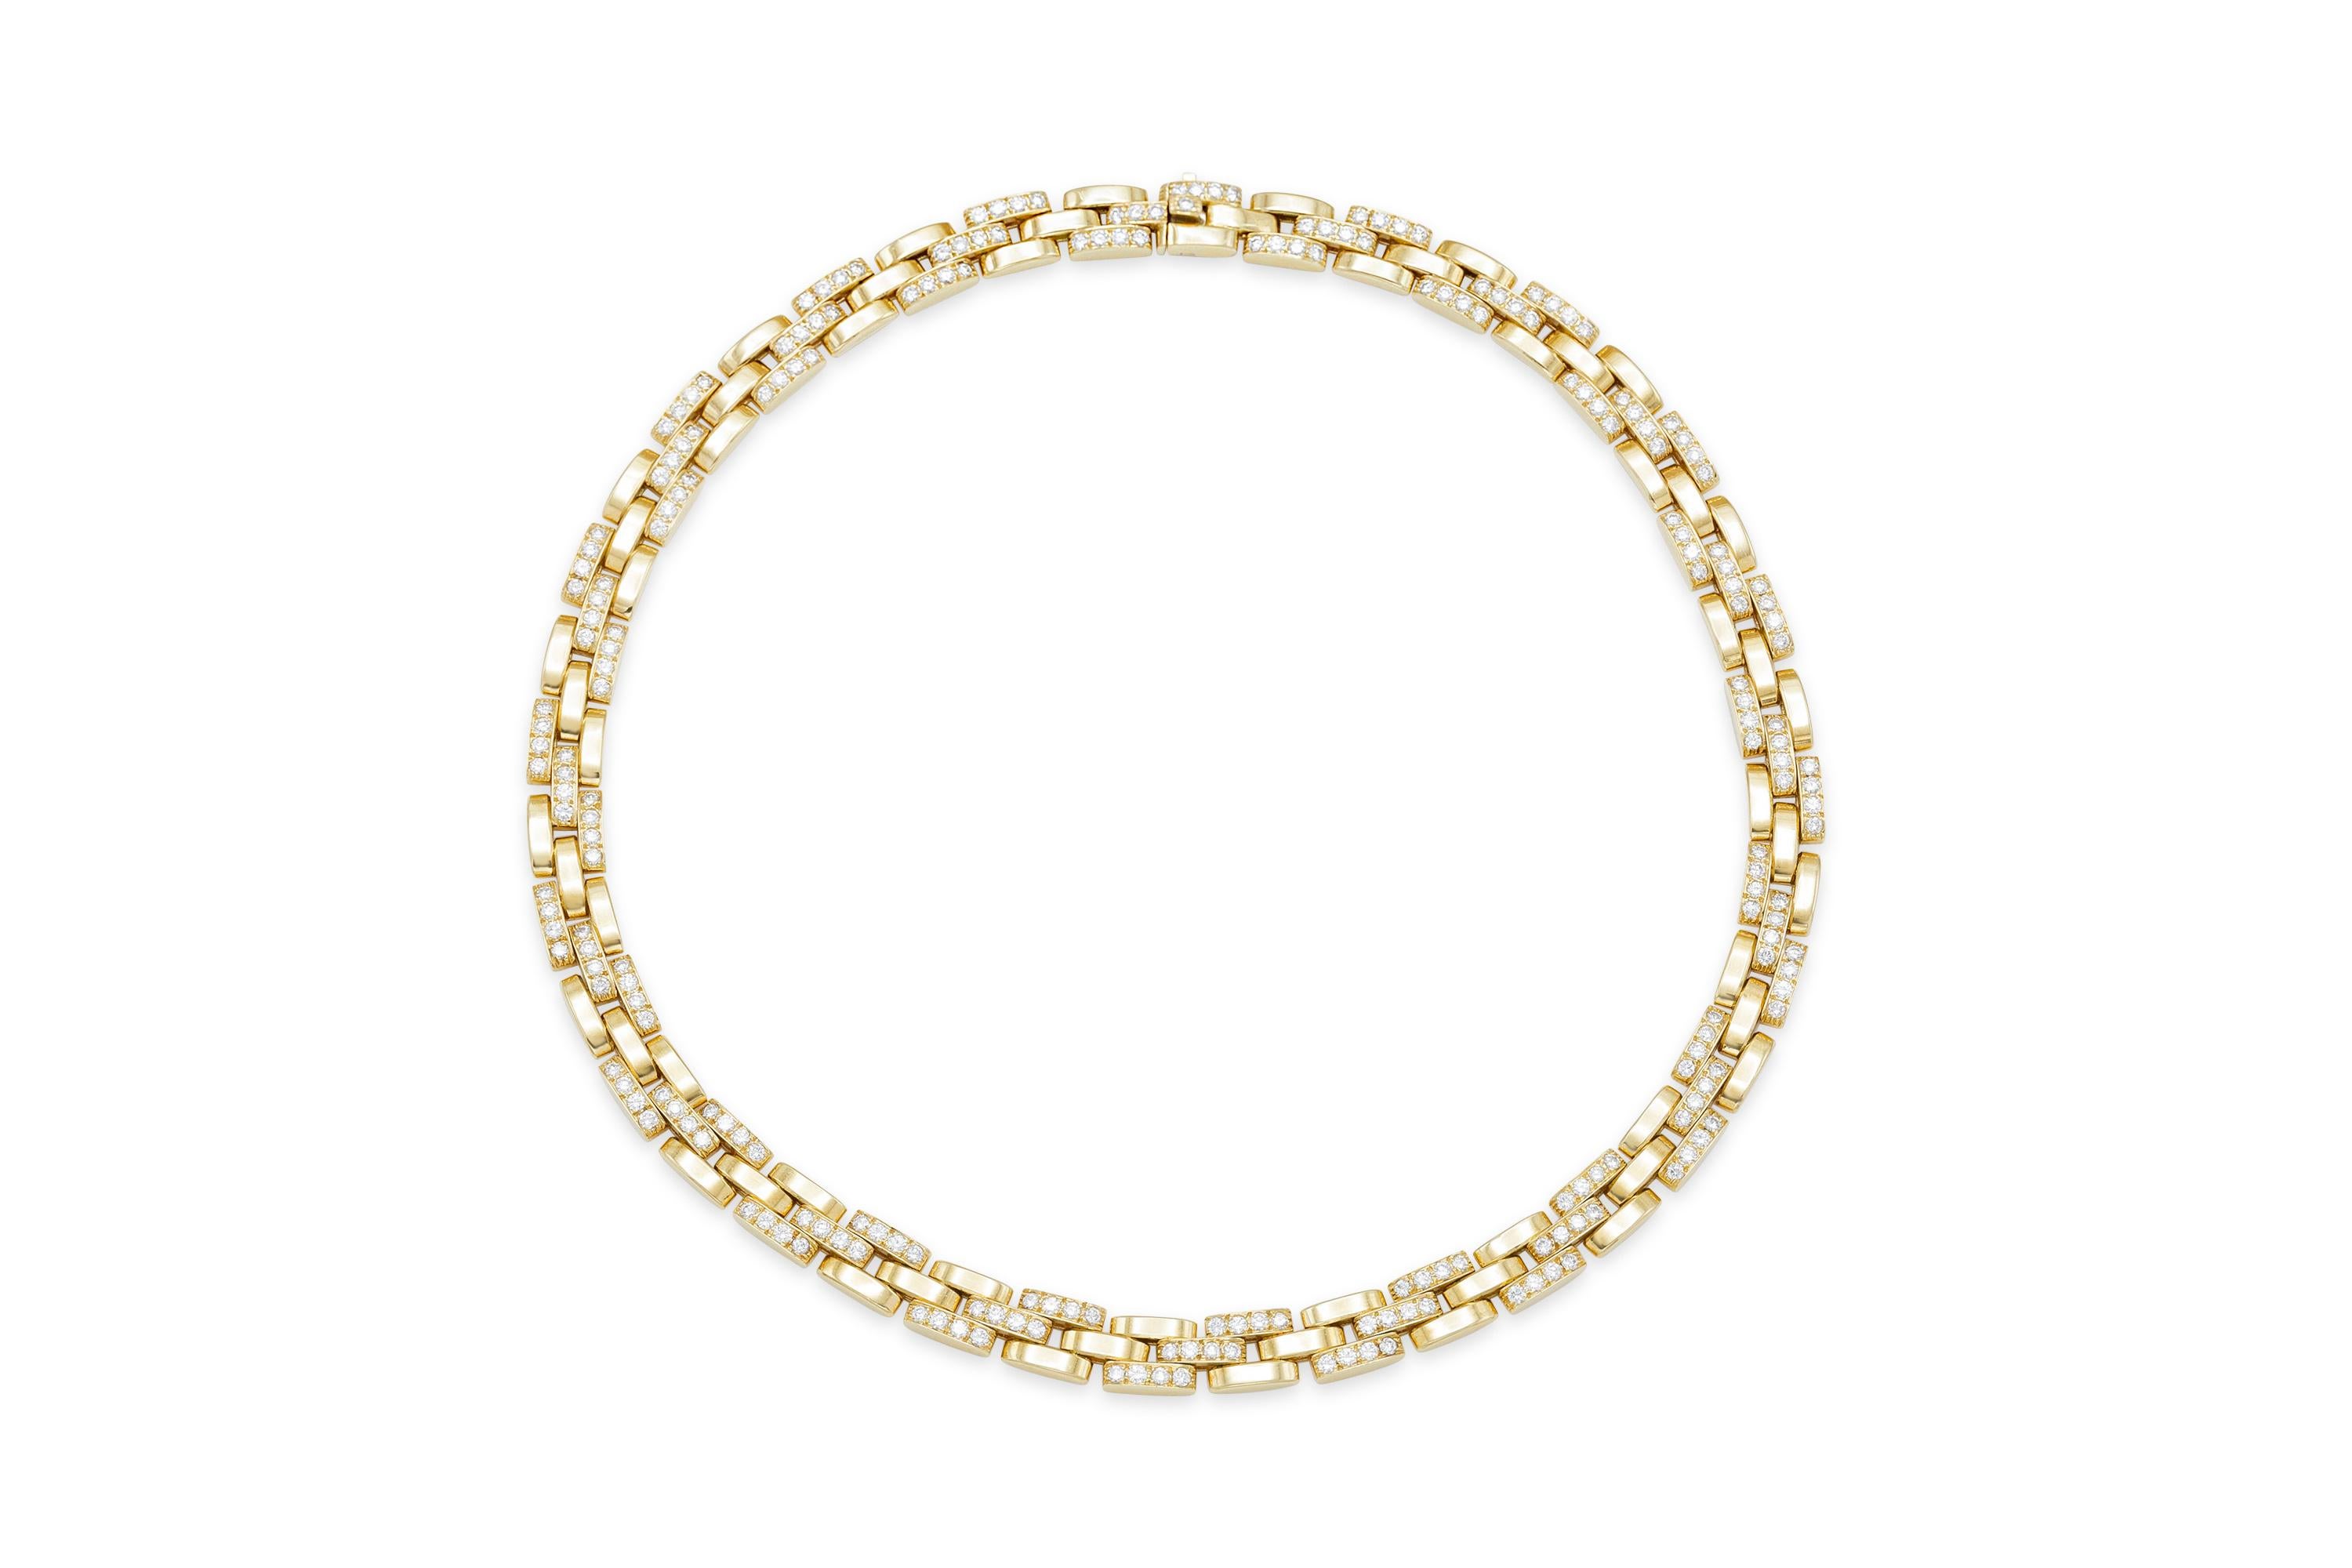 Finely crafted in 18K yellow gold with round-brilliant cut diamonds weighing 6.10 carats total featured on alternating maillon links.
Size 16 1/2 inches.
Signed and numbered by Cartier, from their Panthere collection.
Comes with Cartier